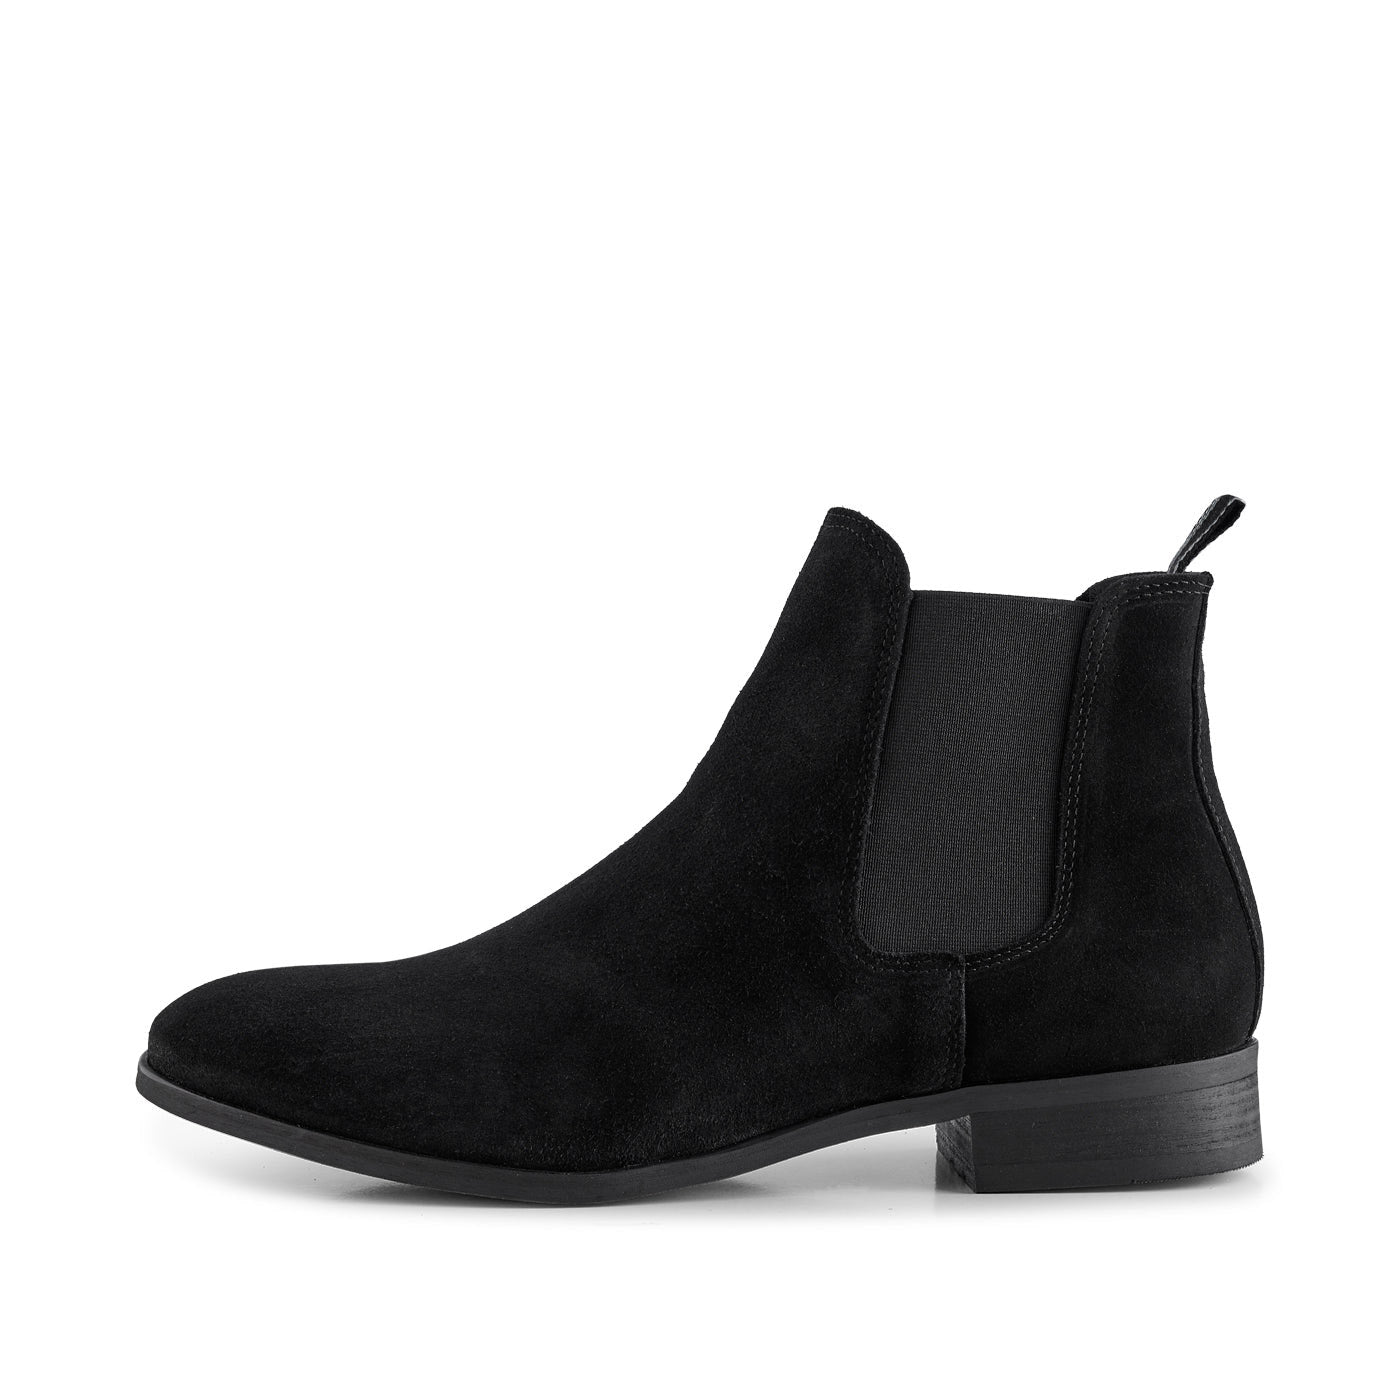 Men's Boots, Leather, Suede & Black Boots